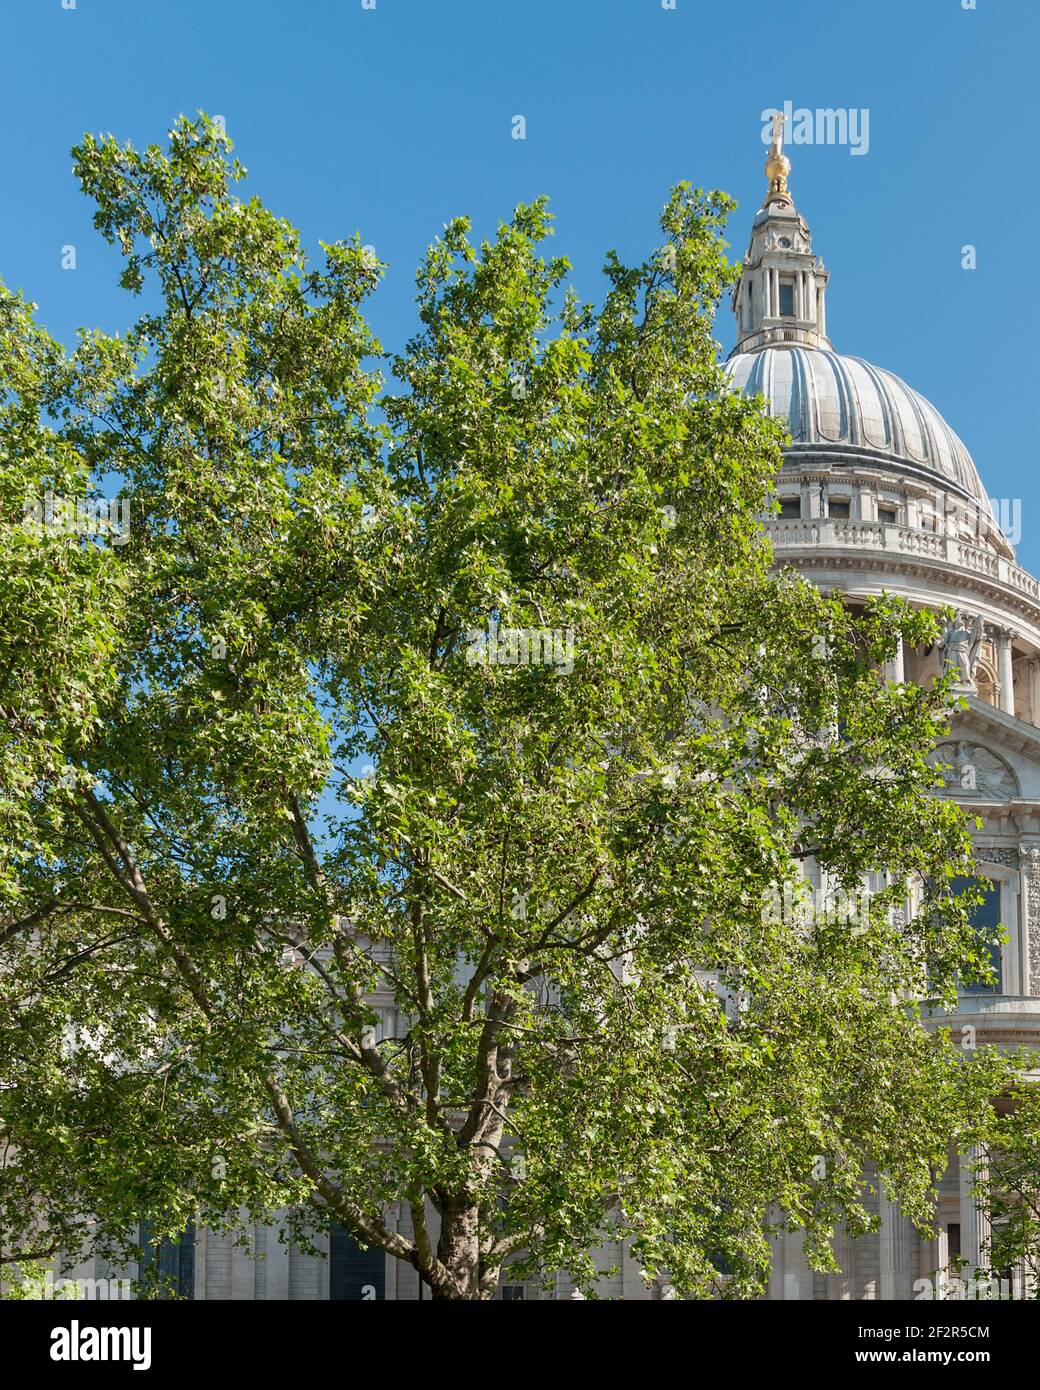 LONDON, UK - MAY 24, 2010:  The dome of St Paul's Cathedral seen through spring foliage Stock Photo